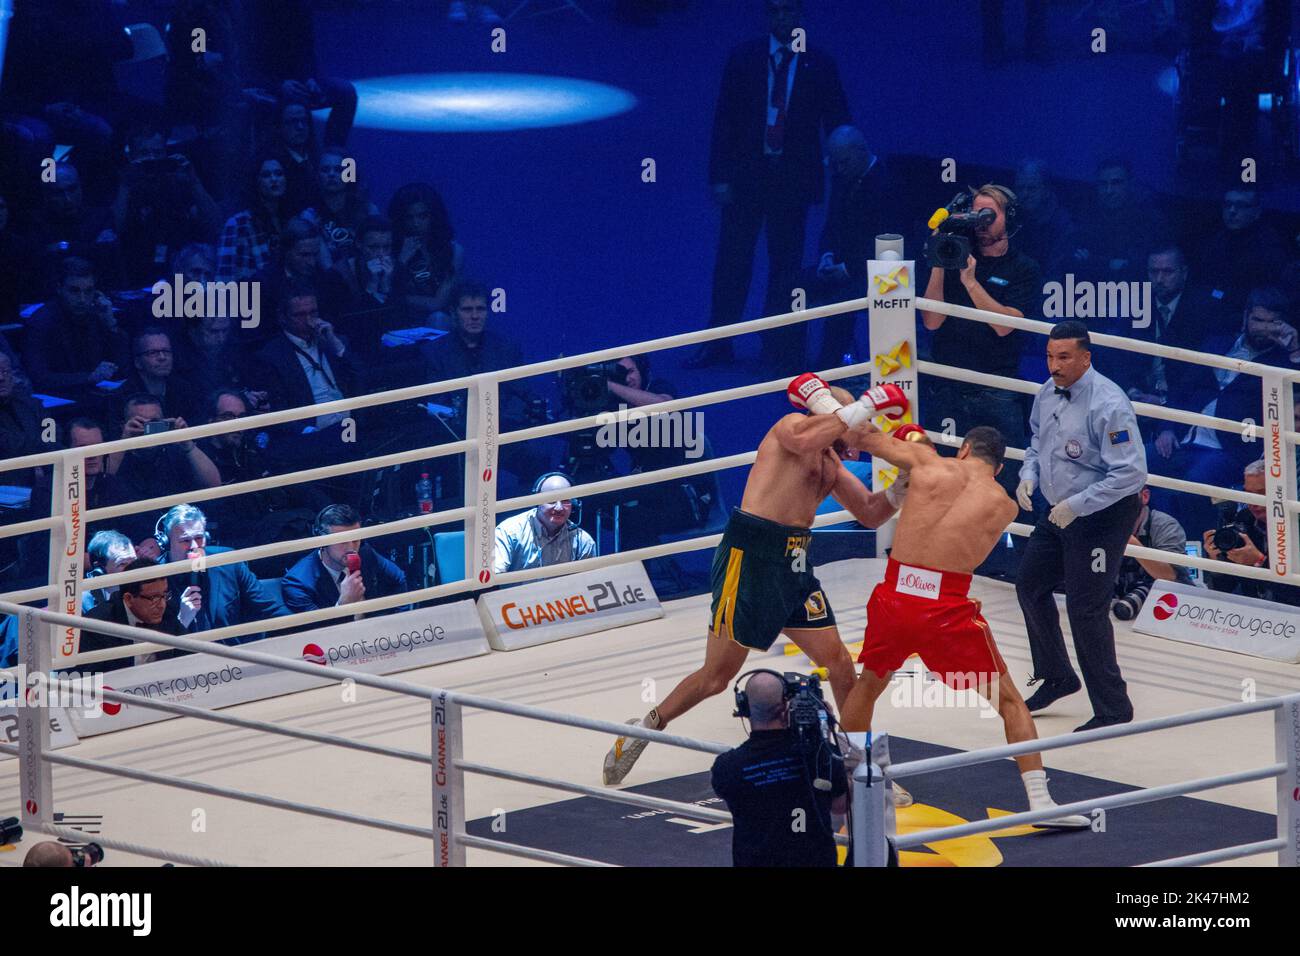 11-28-2015 Dusseldorf, Germany. Wladimir Klitschko misses with a left and Tyson Fury tries to shoot with a right overhand.  T. Weeks - referee, Carl F Stock Photo